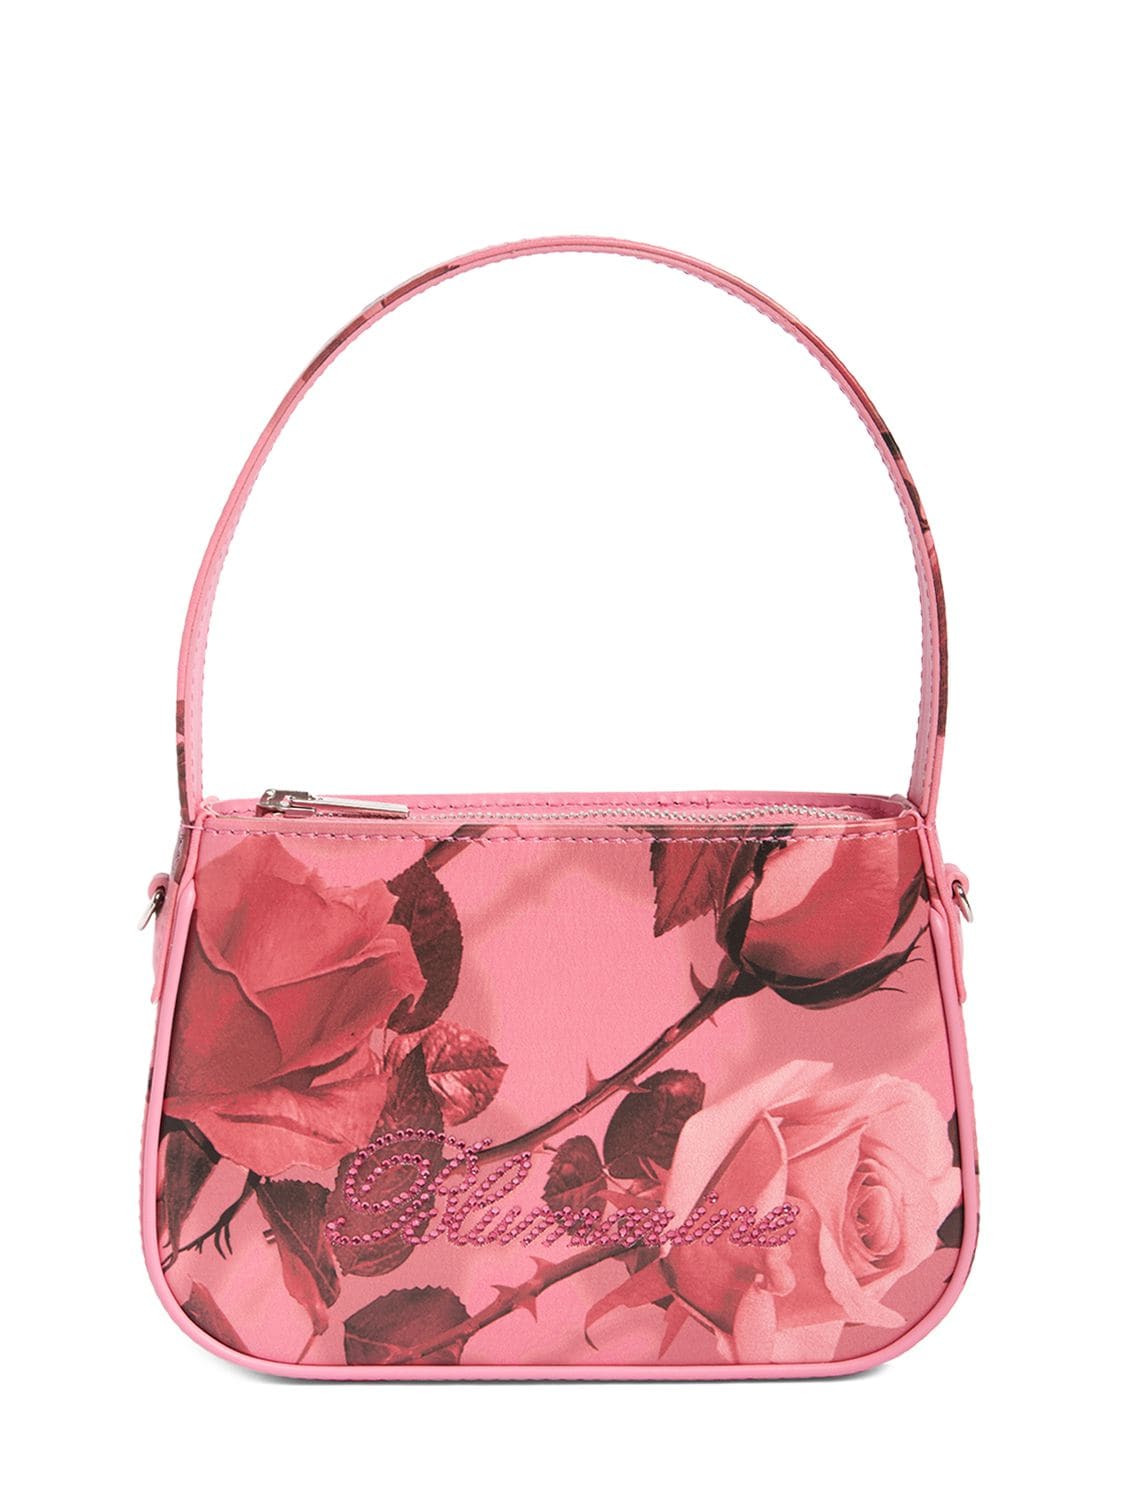 Image of St. Rose Napa Leather Top Handle Bag